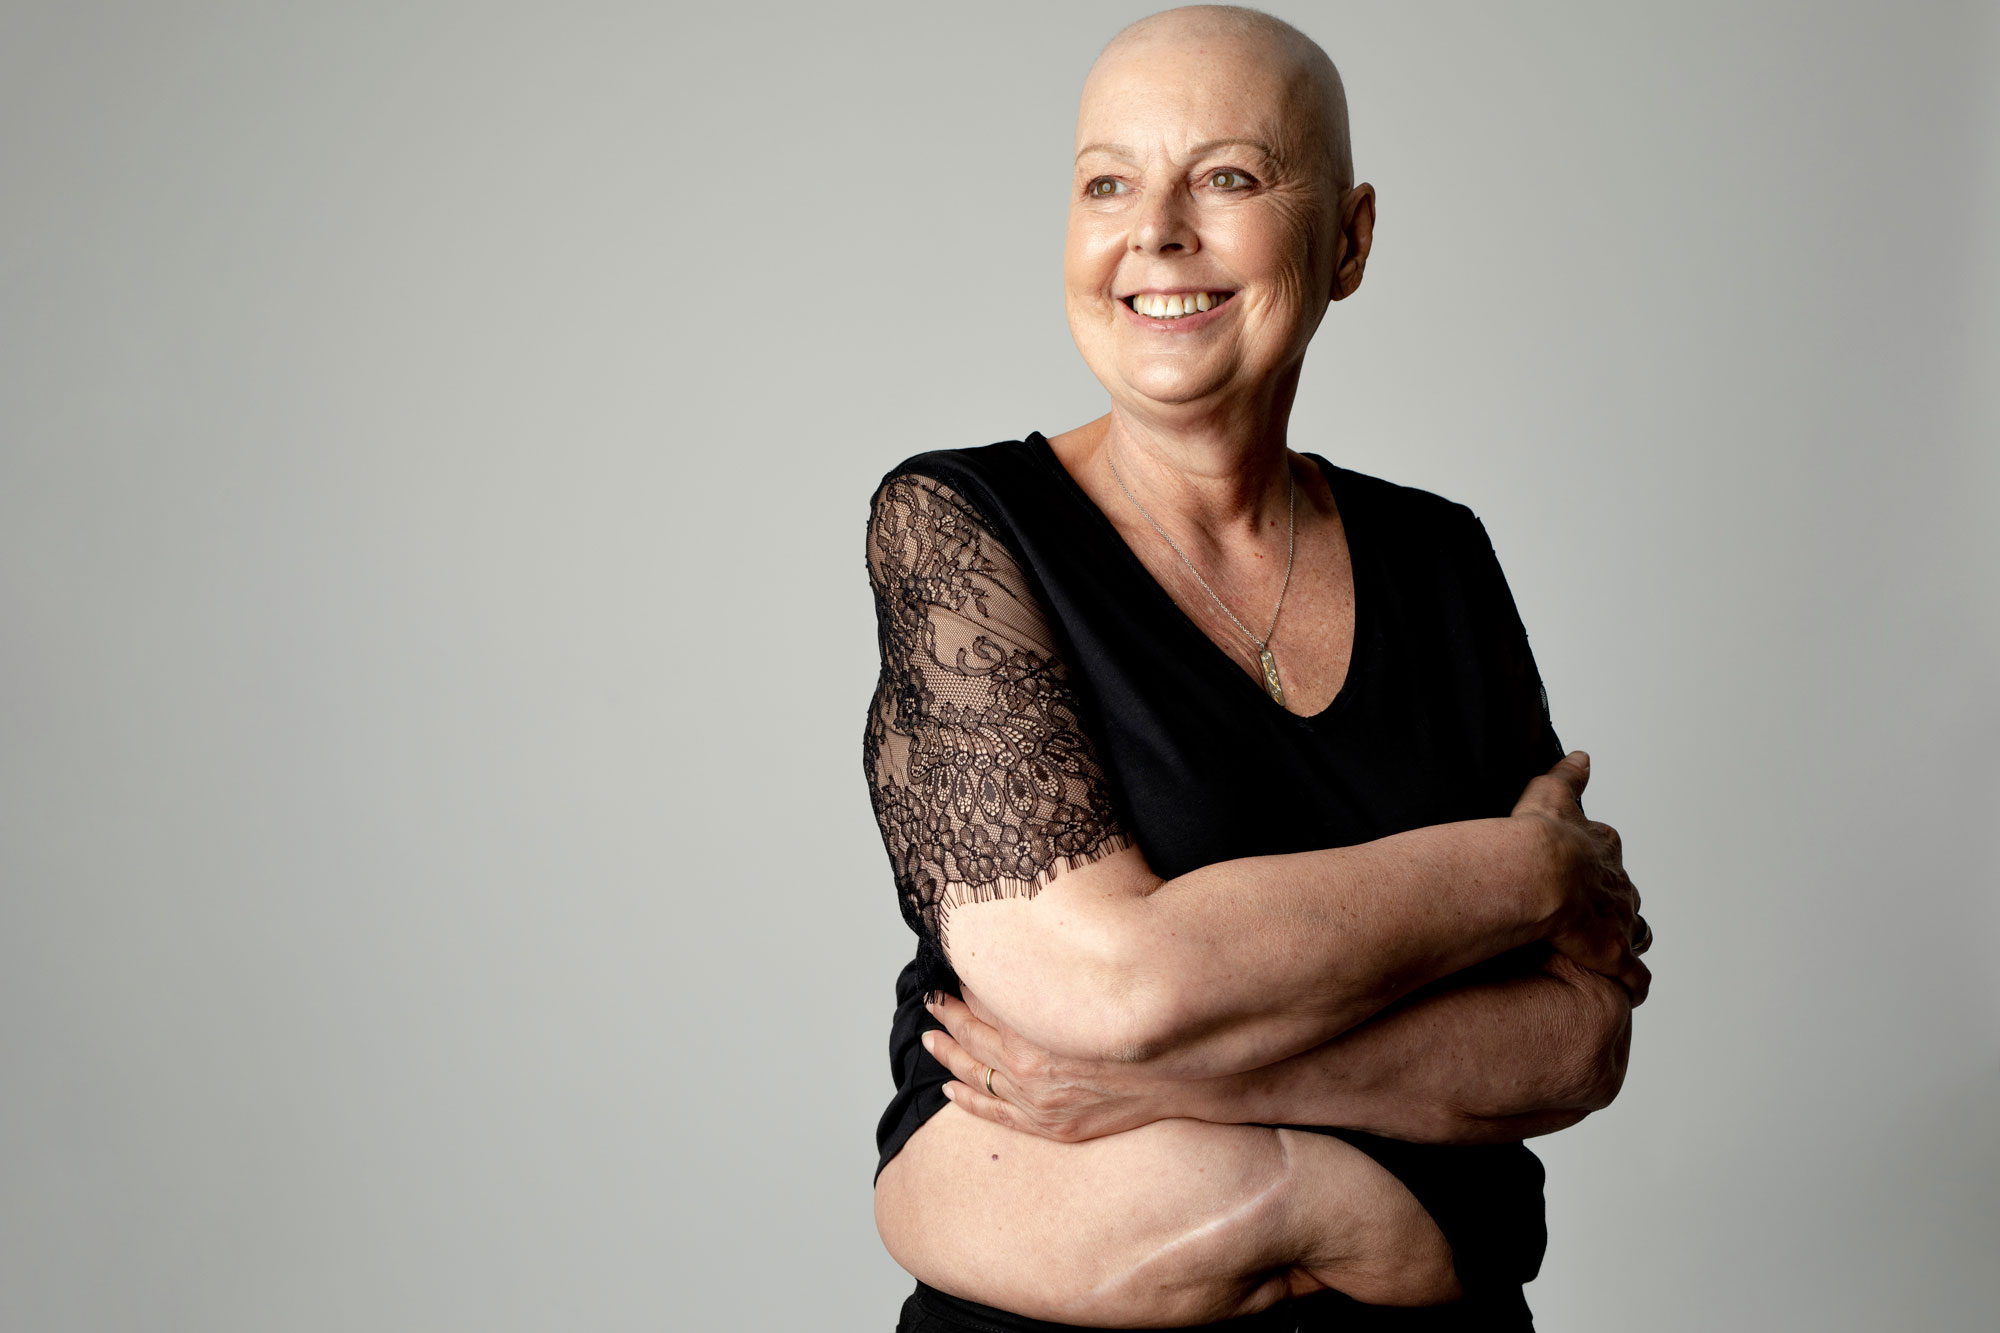 Barbara Hibbert, 61, who has stage 4 bowel cancer, is at the heart of powerful portrait series for Bowel Cancer UK’s national campaign